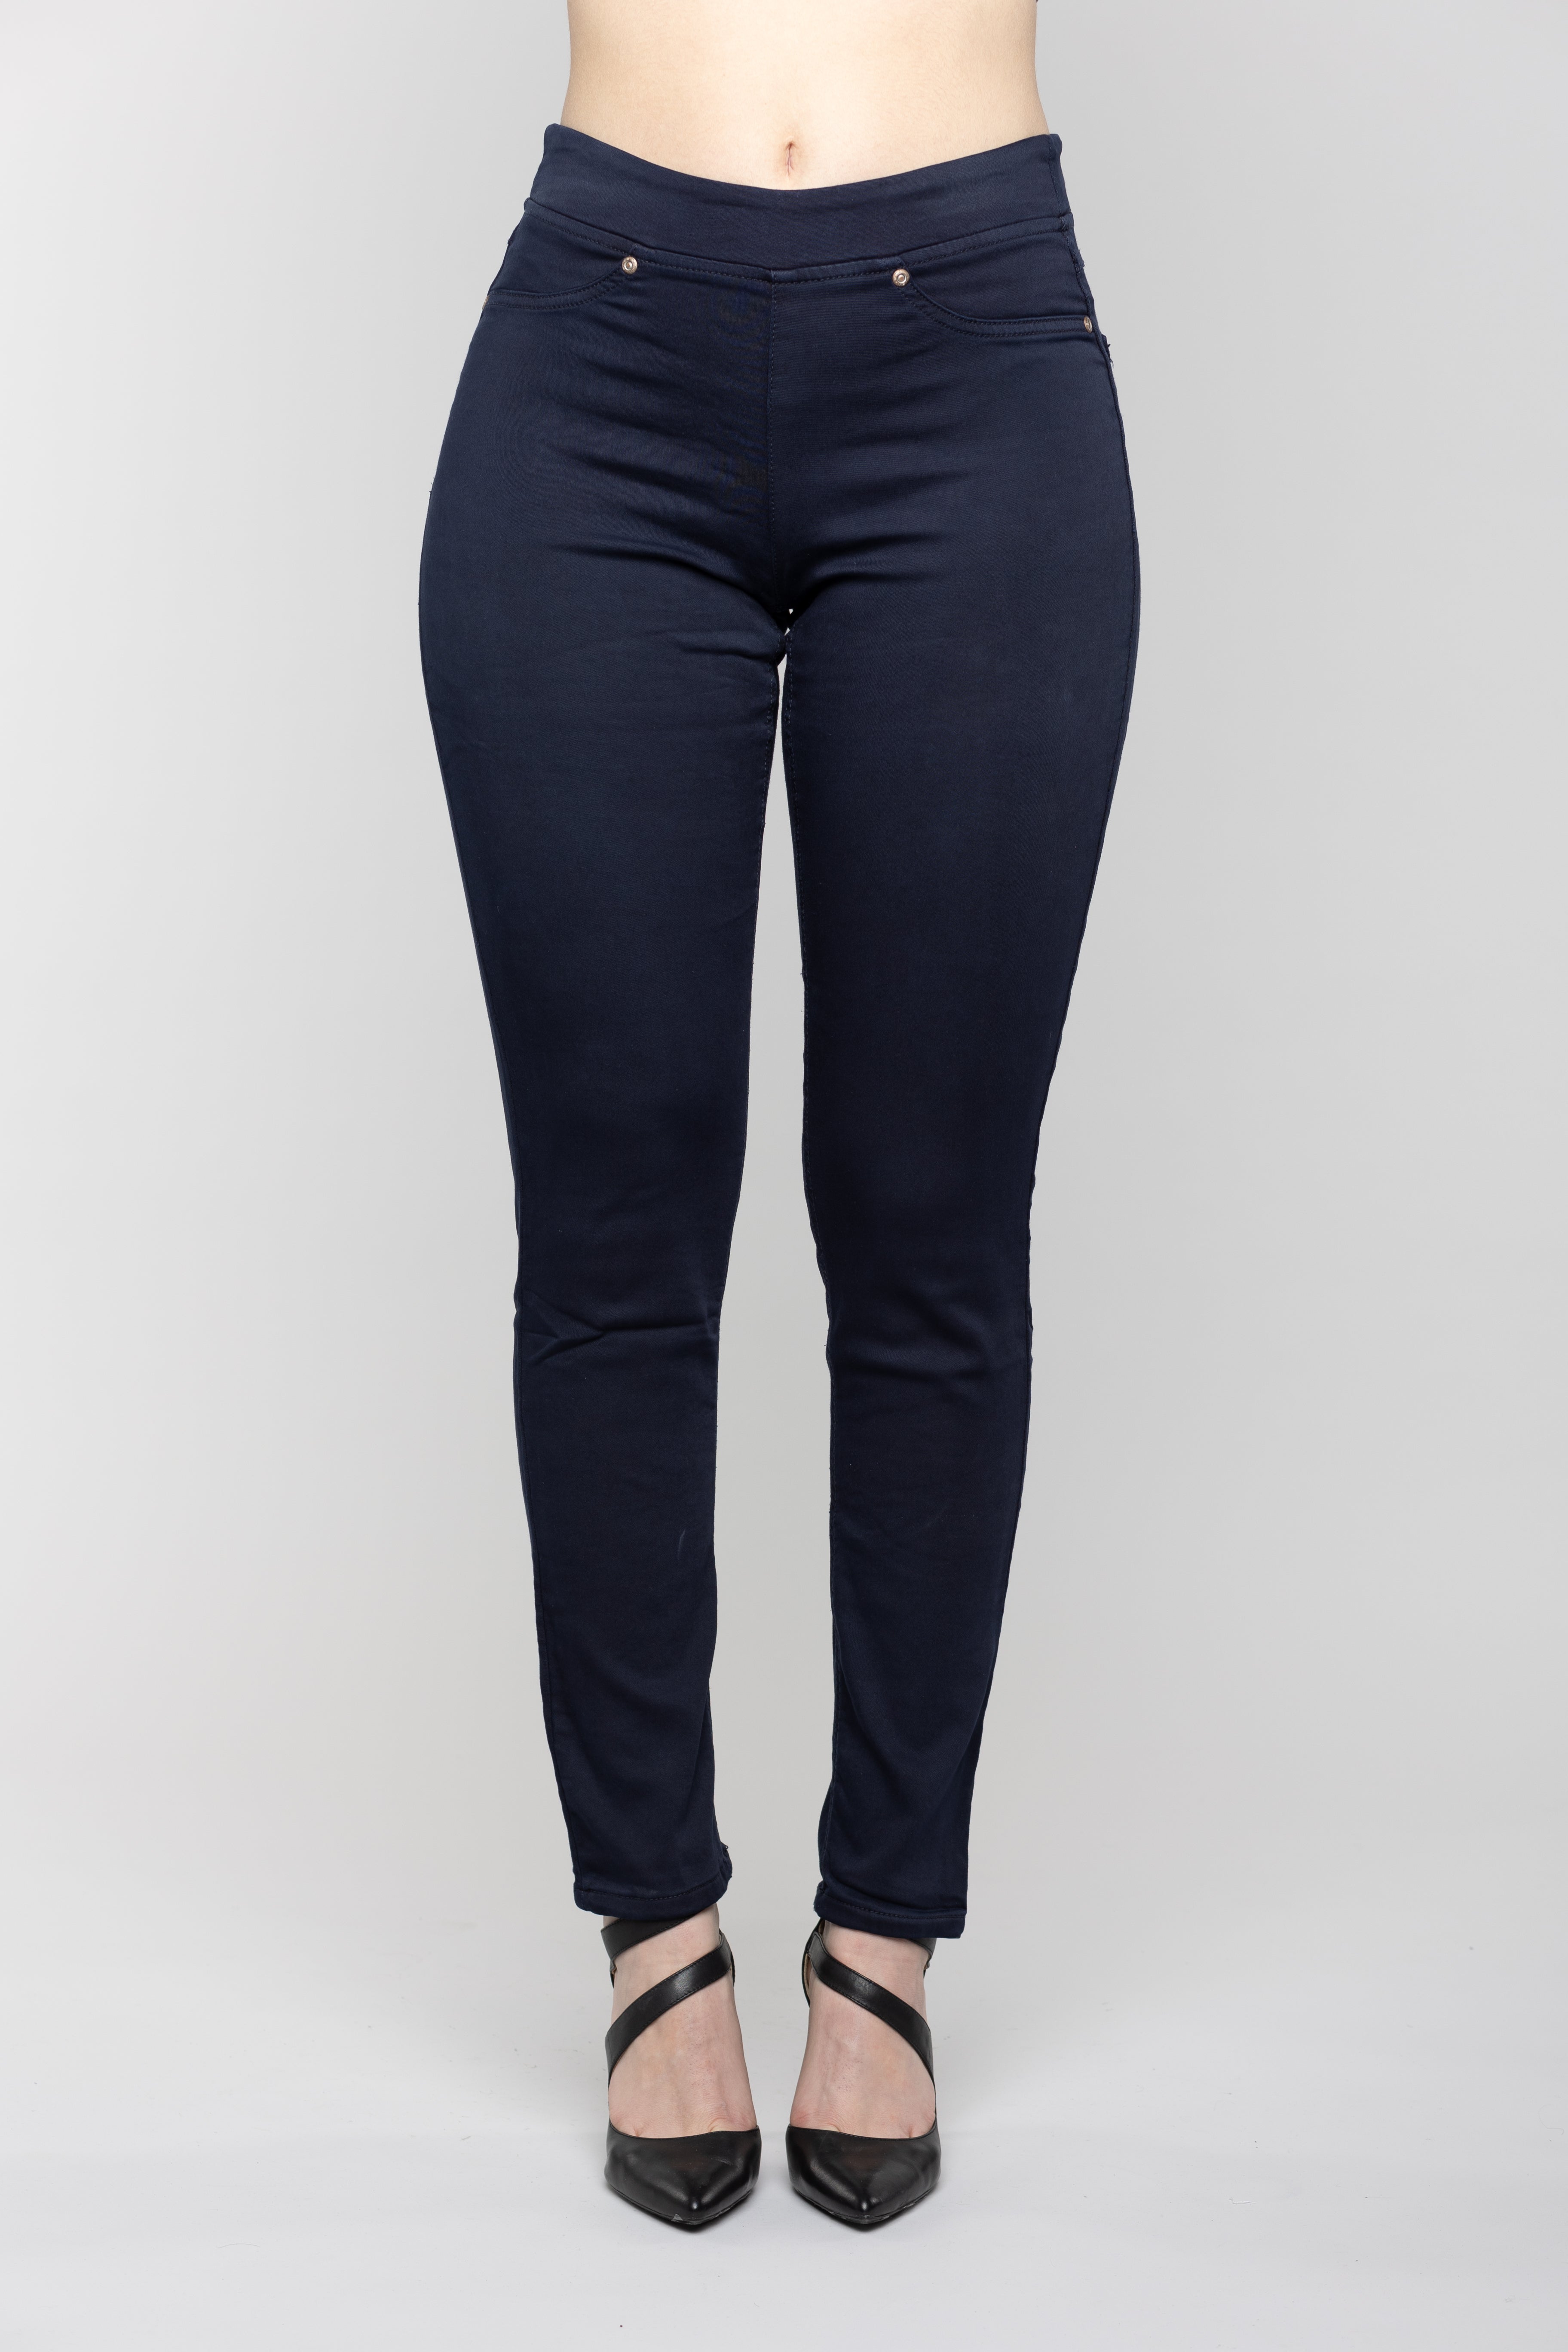 Angela Slim Leg Pull-On in Navy French Terry Knit